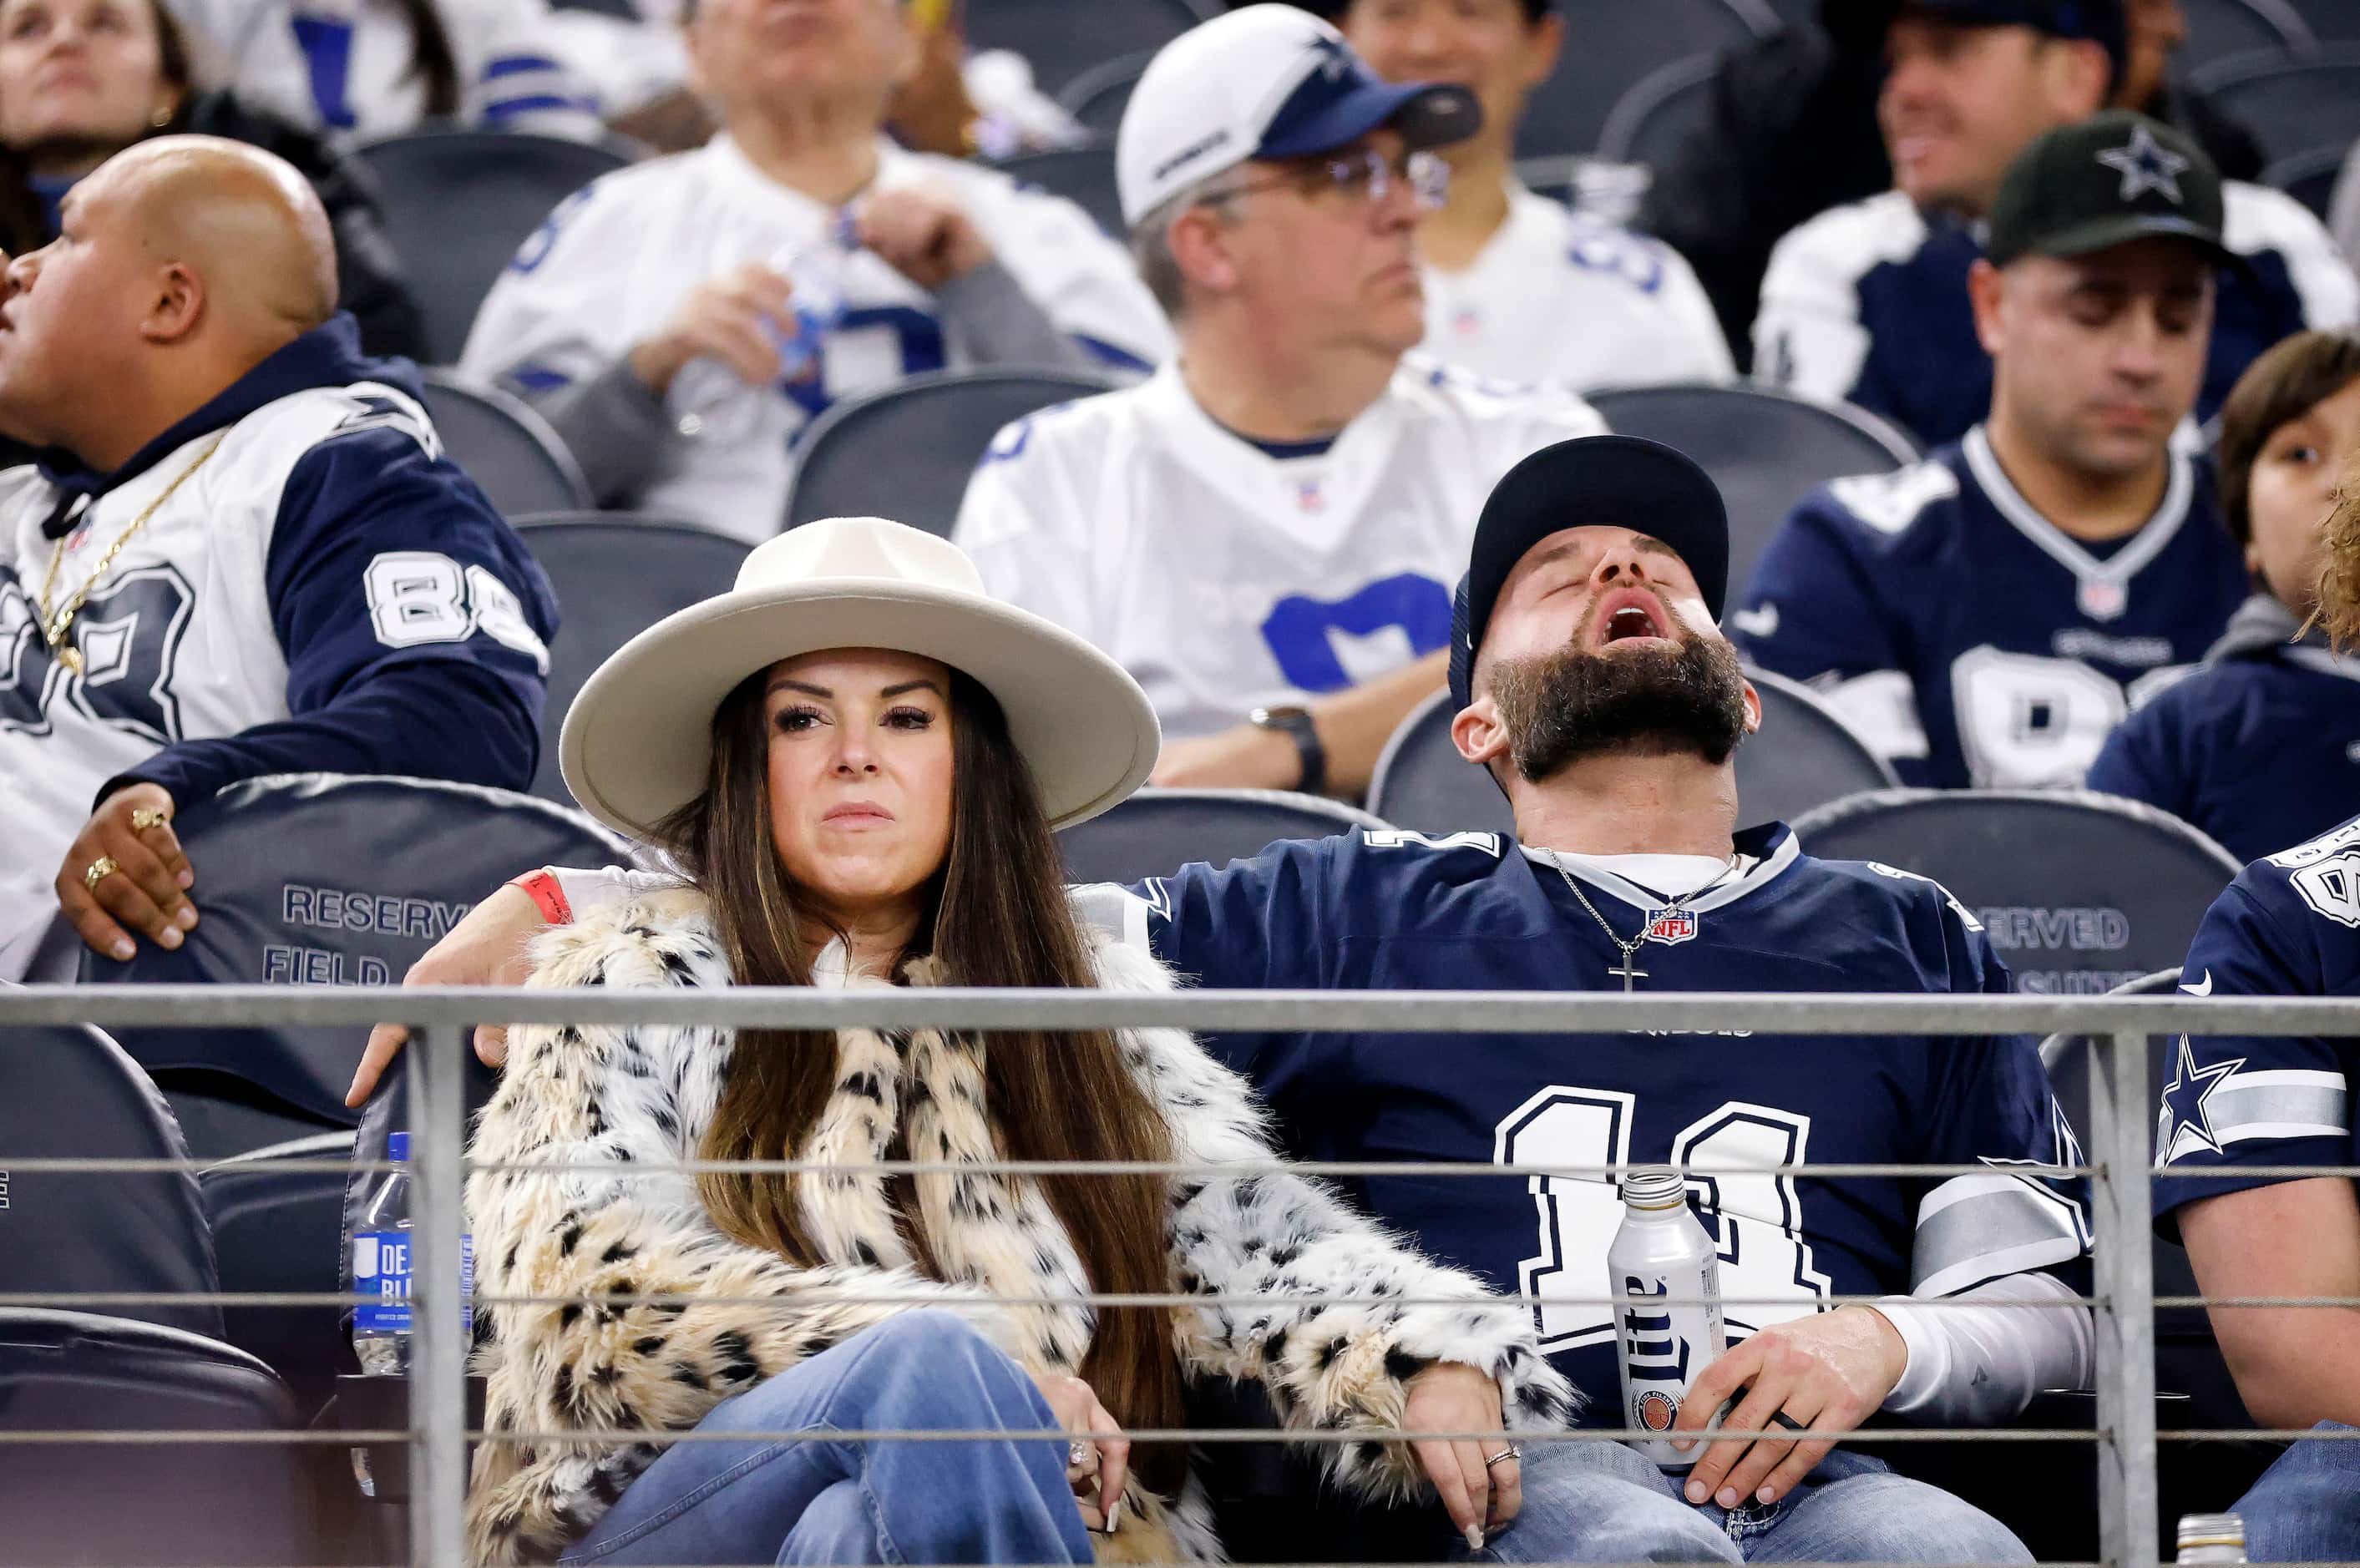 Dallas Cowboys fans have a hard time watching their team lose to the Green Bay Packers in a...